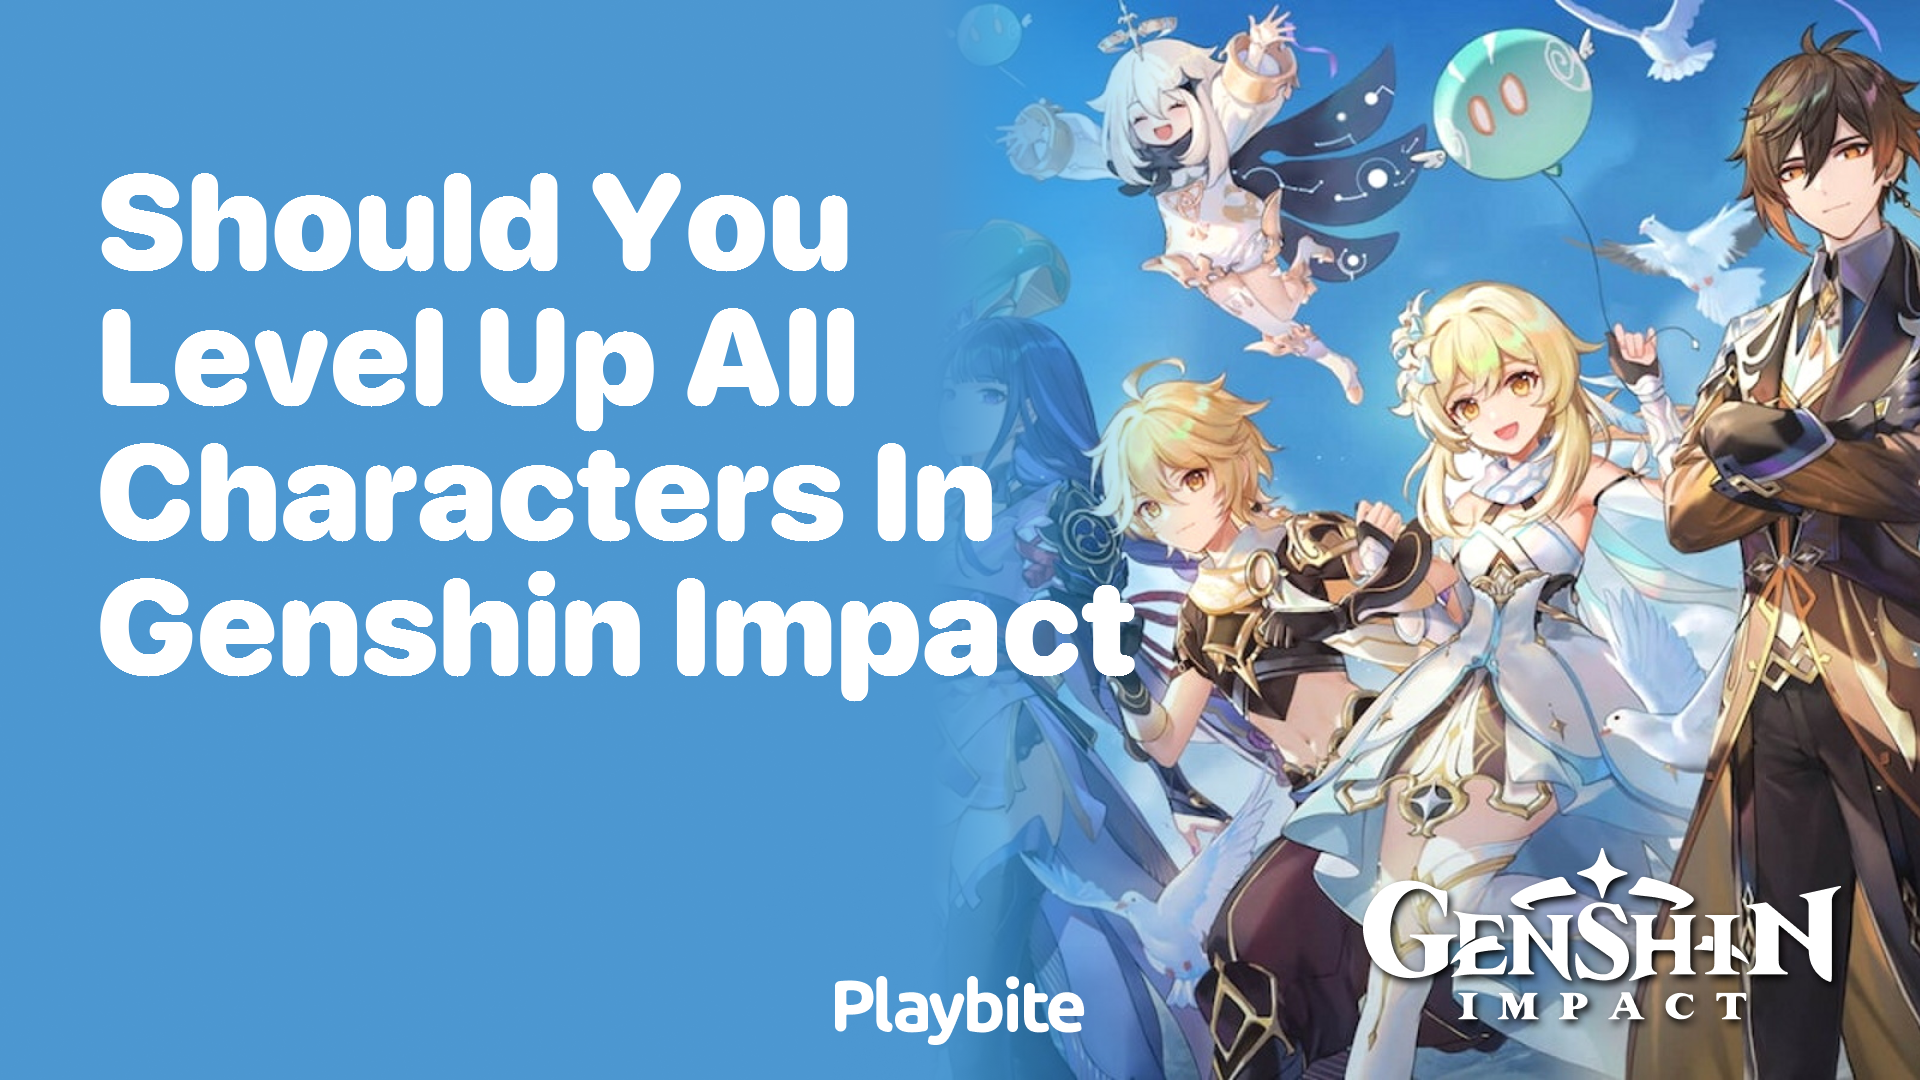 Should You Level Up All Characters in Genshin Impact?